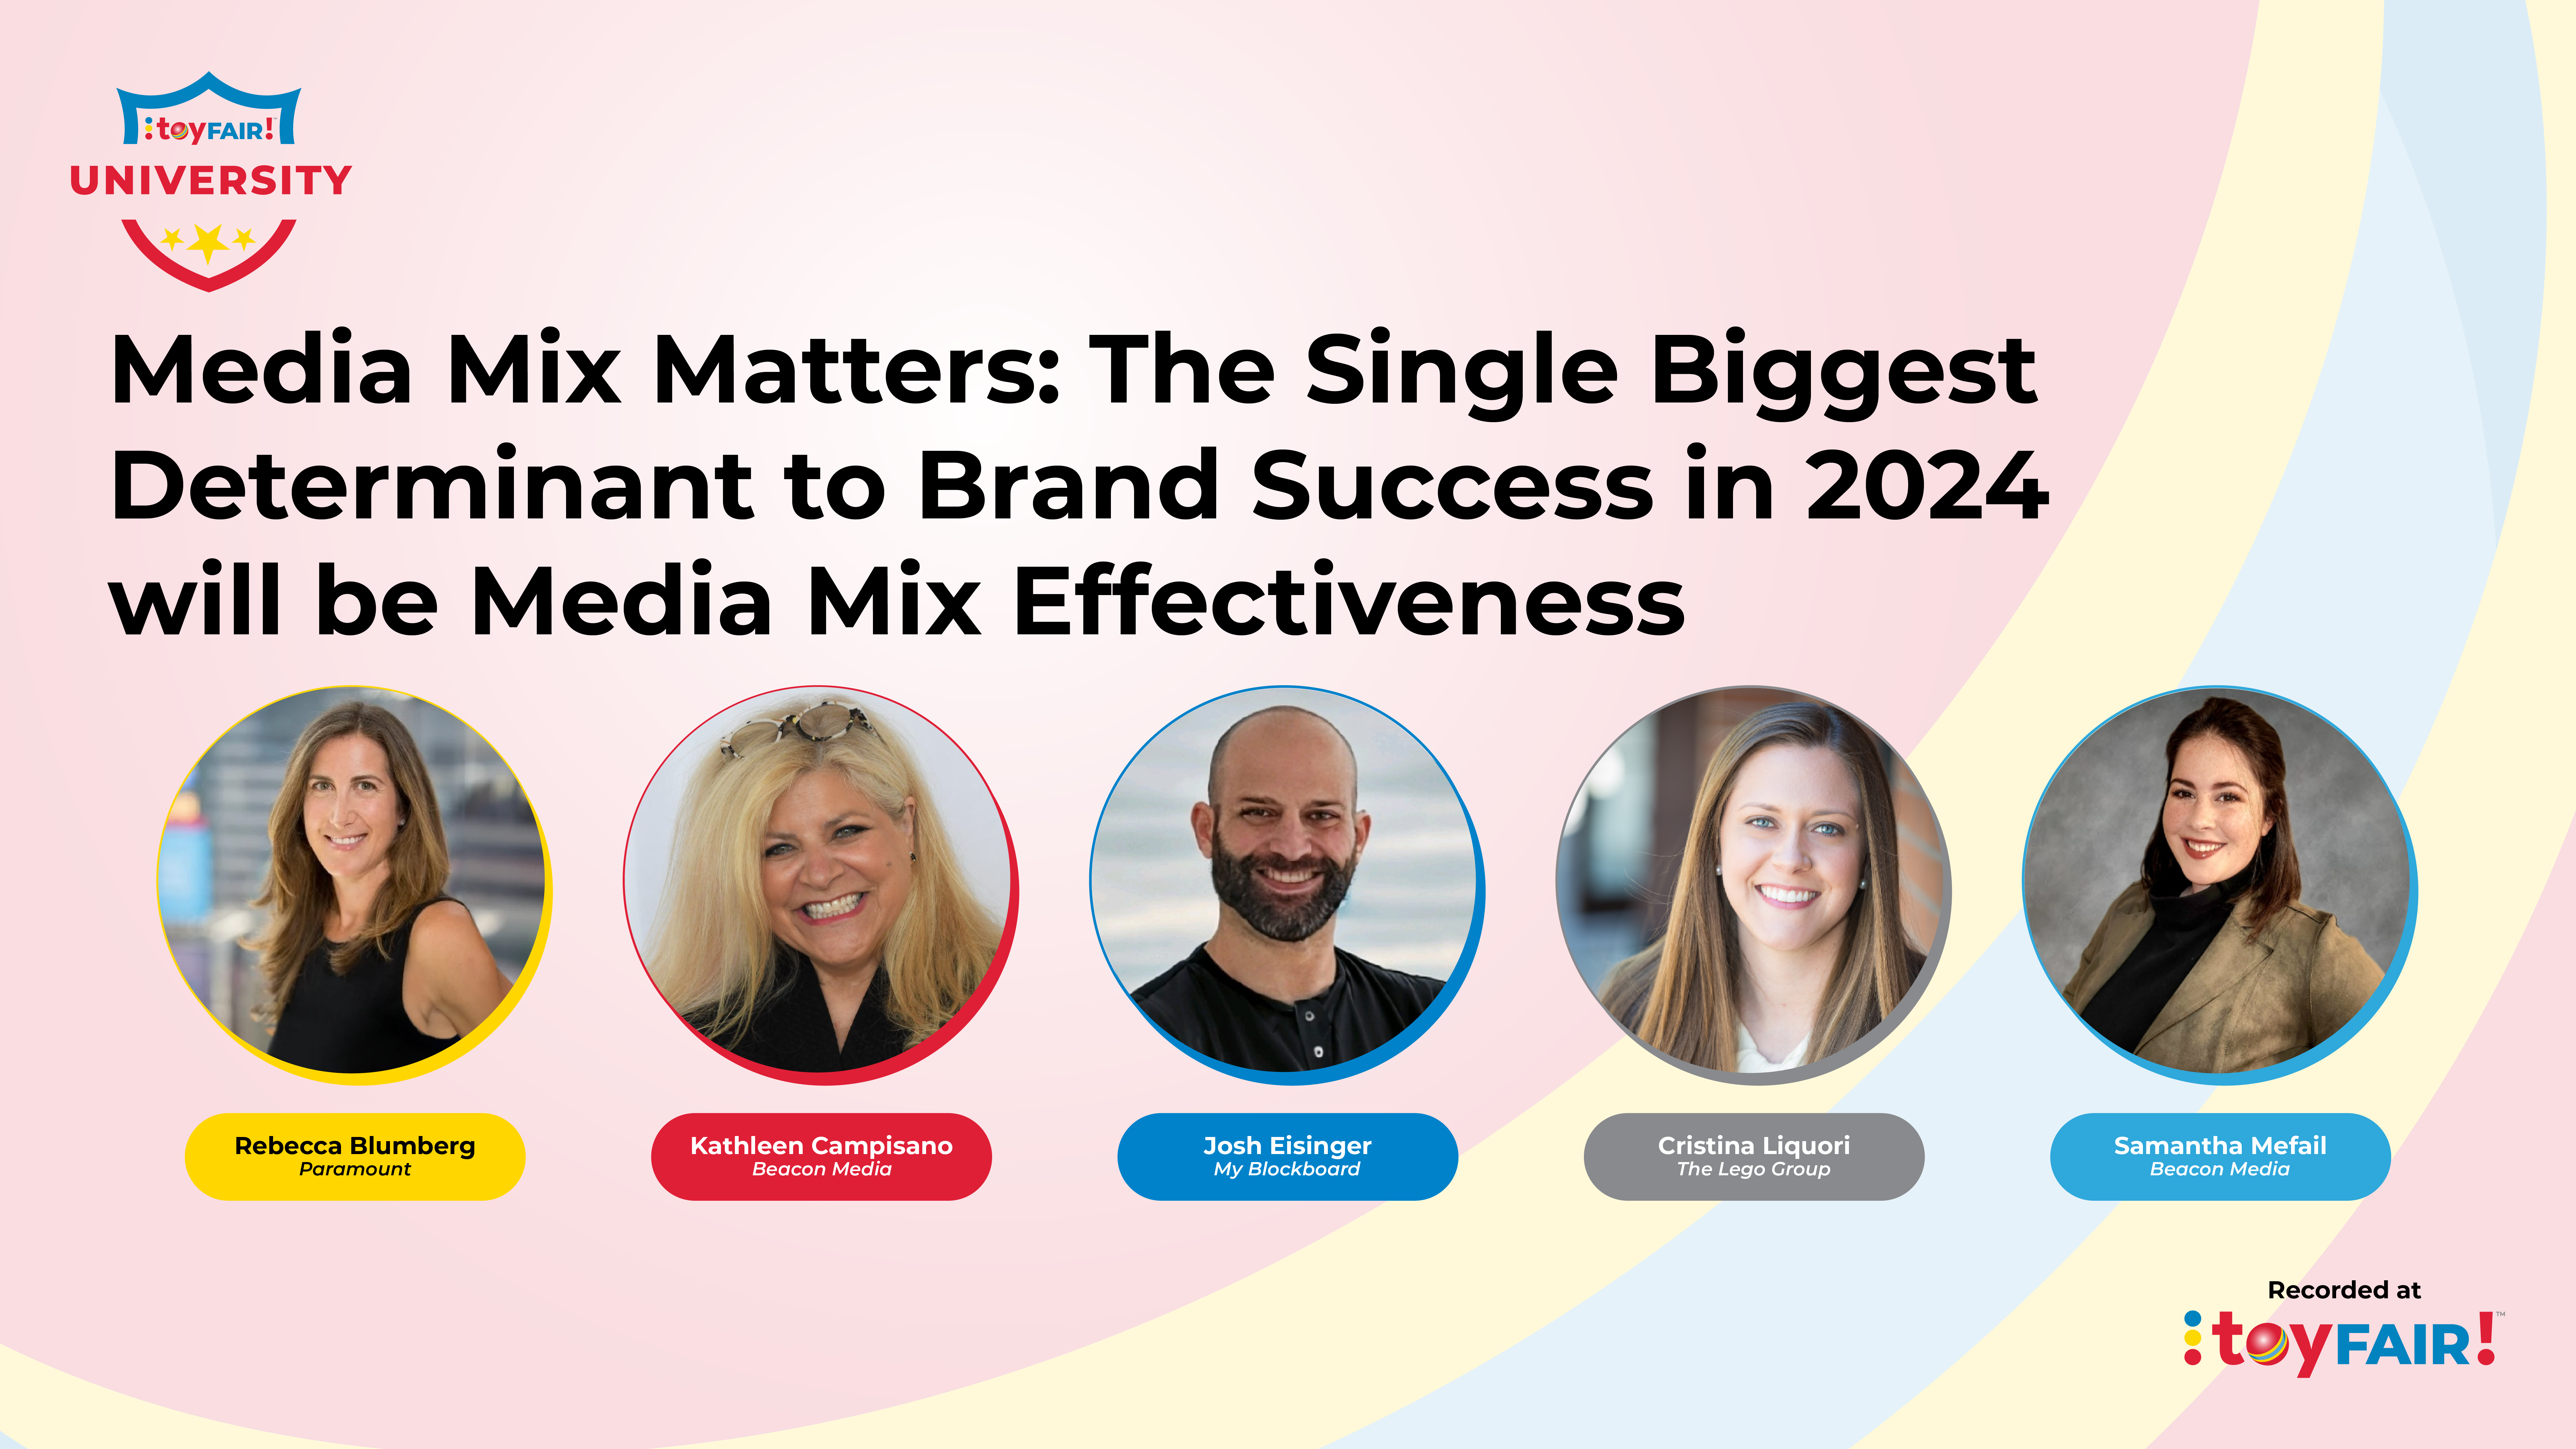 Media Mix Matters: The Single Biggest Determinant to Brand Success in 2024 will be Media Mix Effectiveness